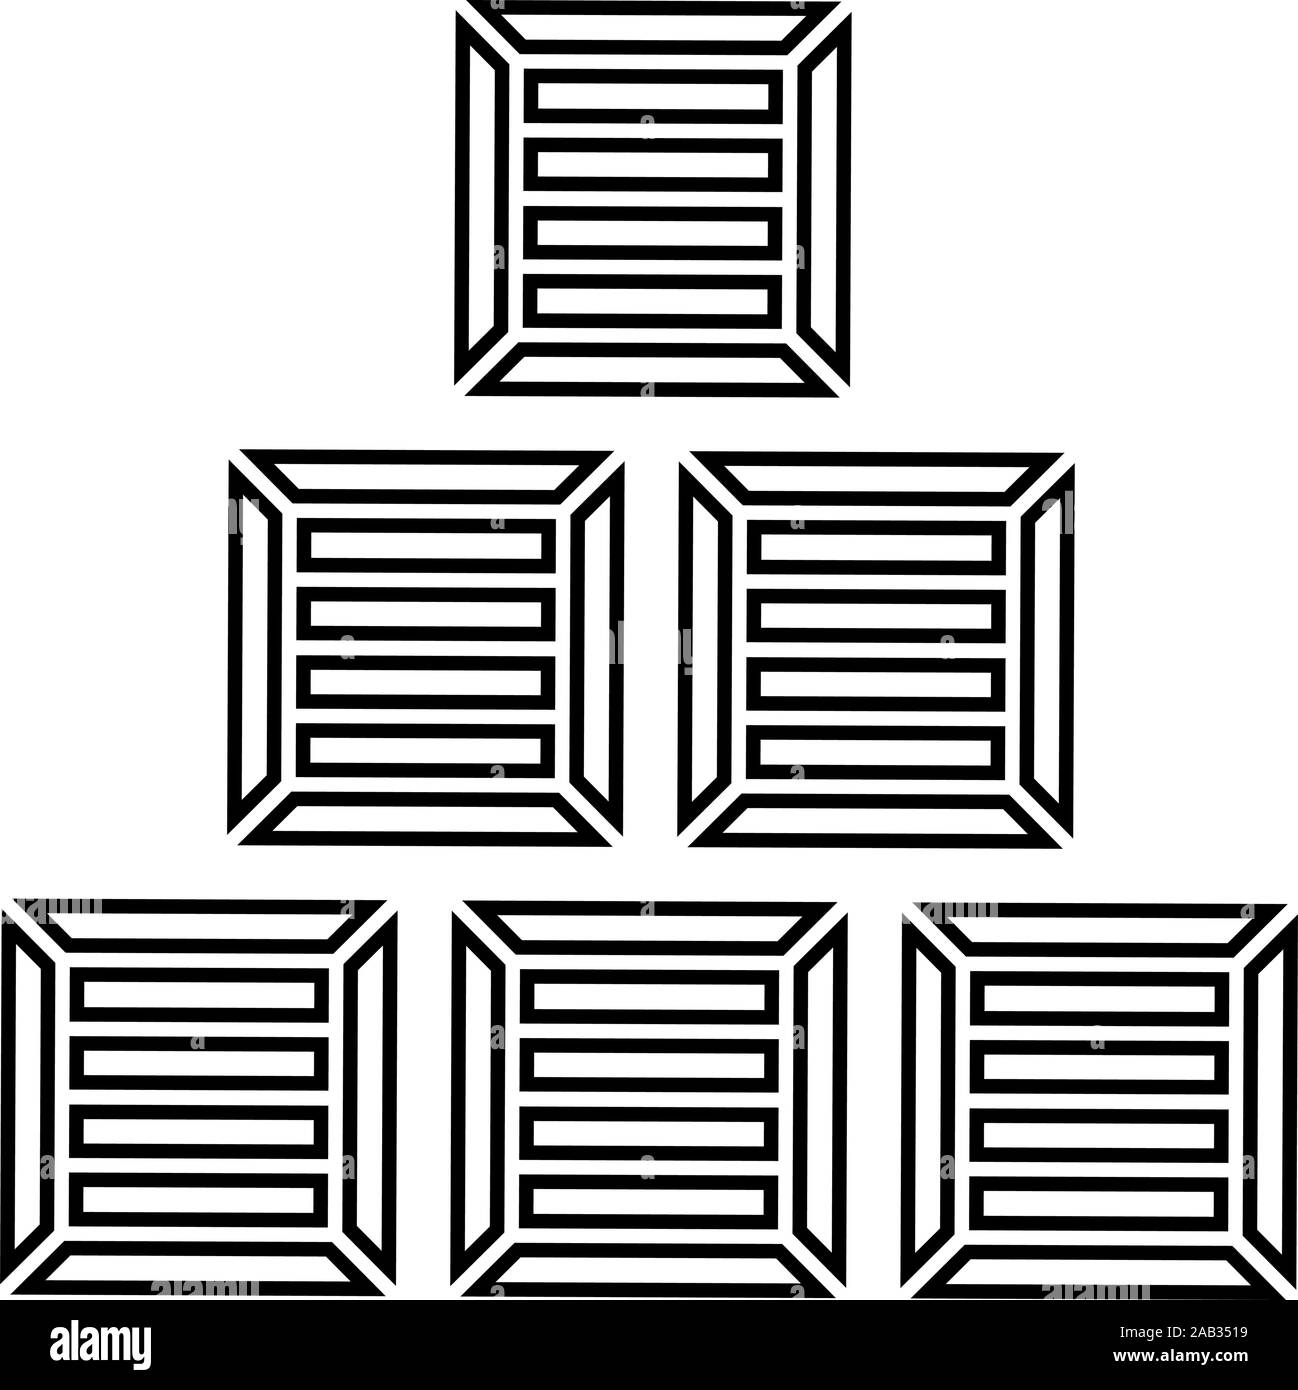 Pyramid crates Wooden boxs Containers icon outline black color vector illustration flat style simple image Stock Vector